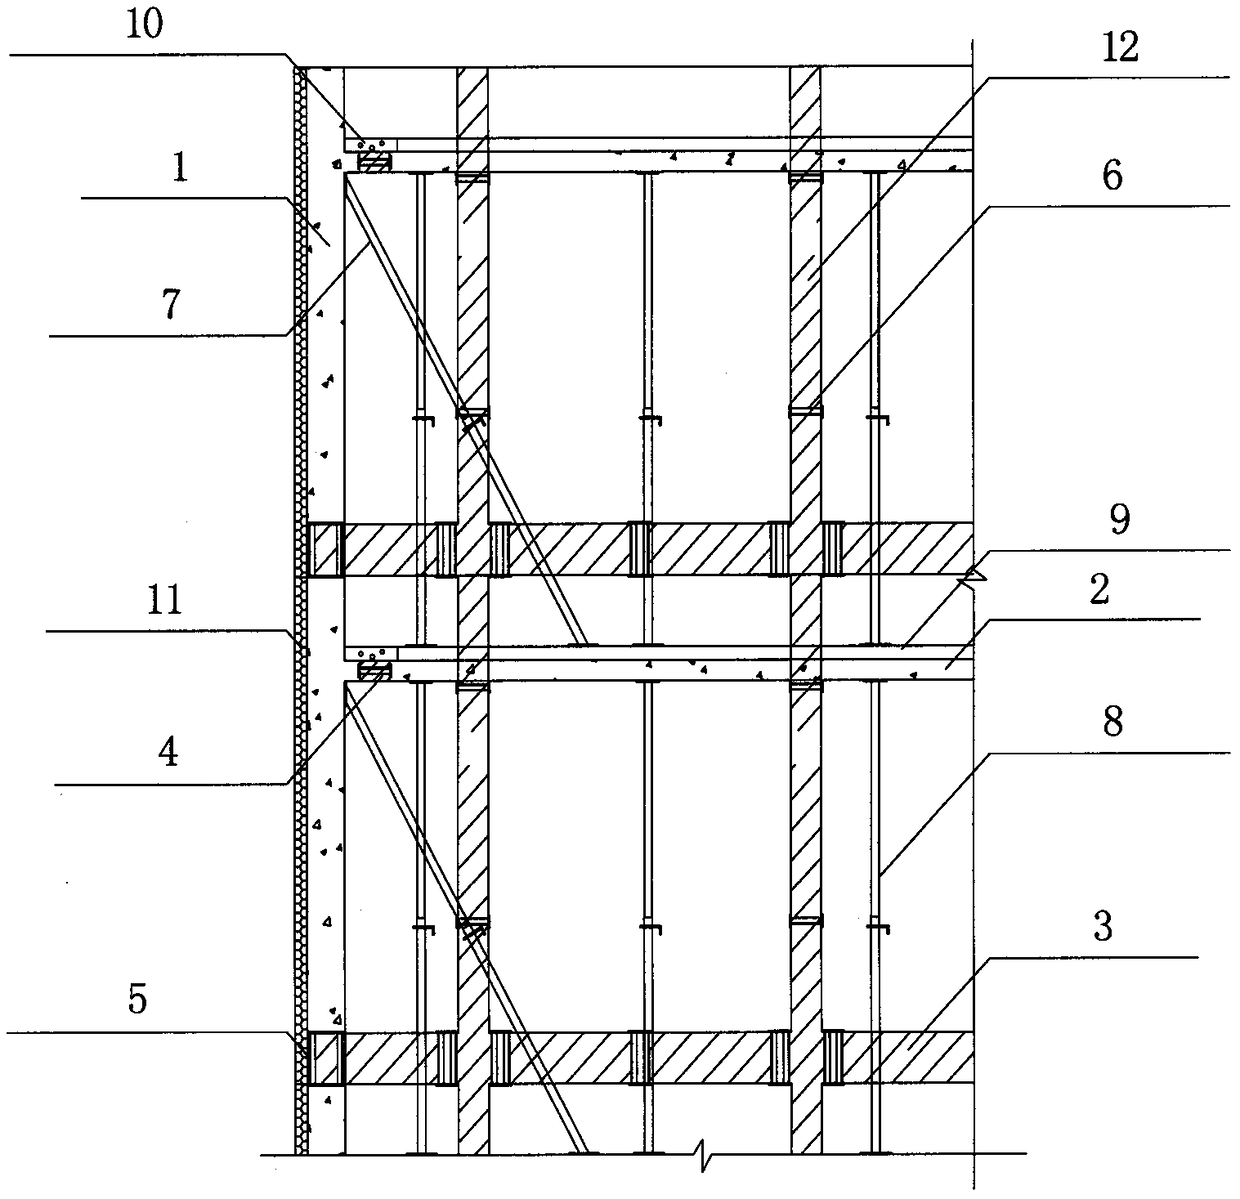 Shear wall structure building assembly system design